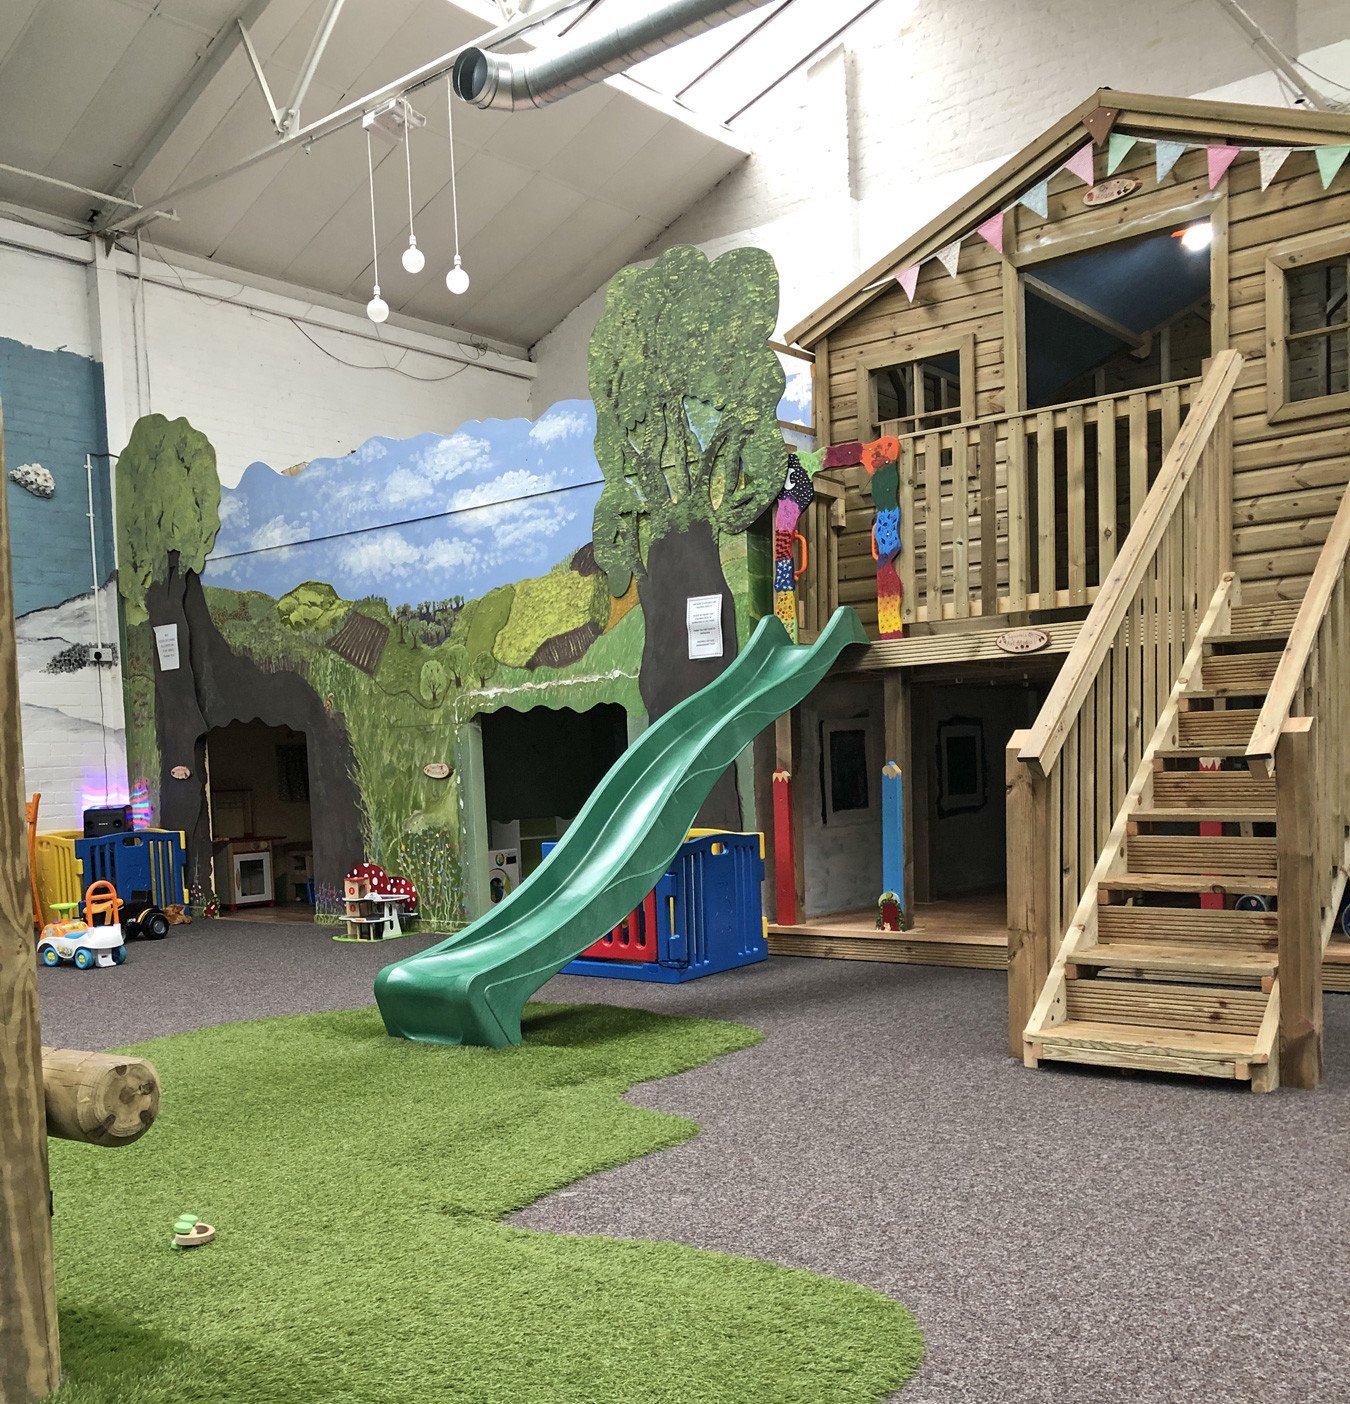 constructive play centre for children